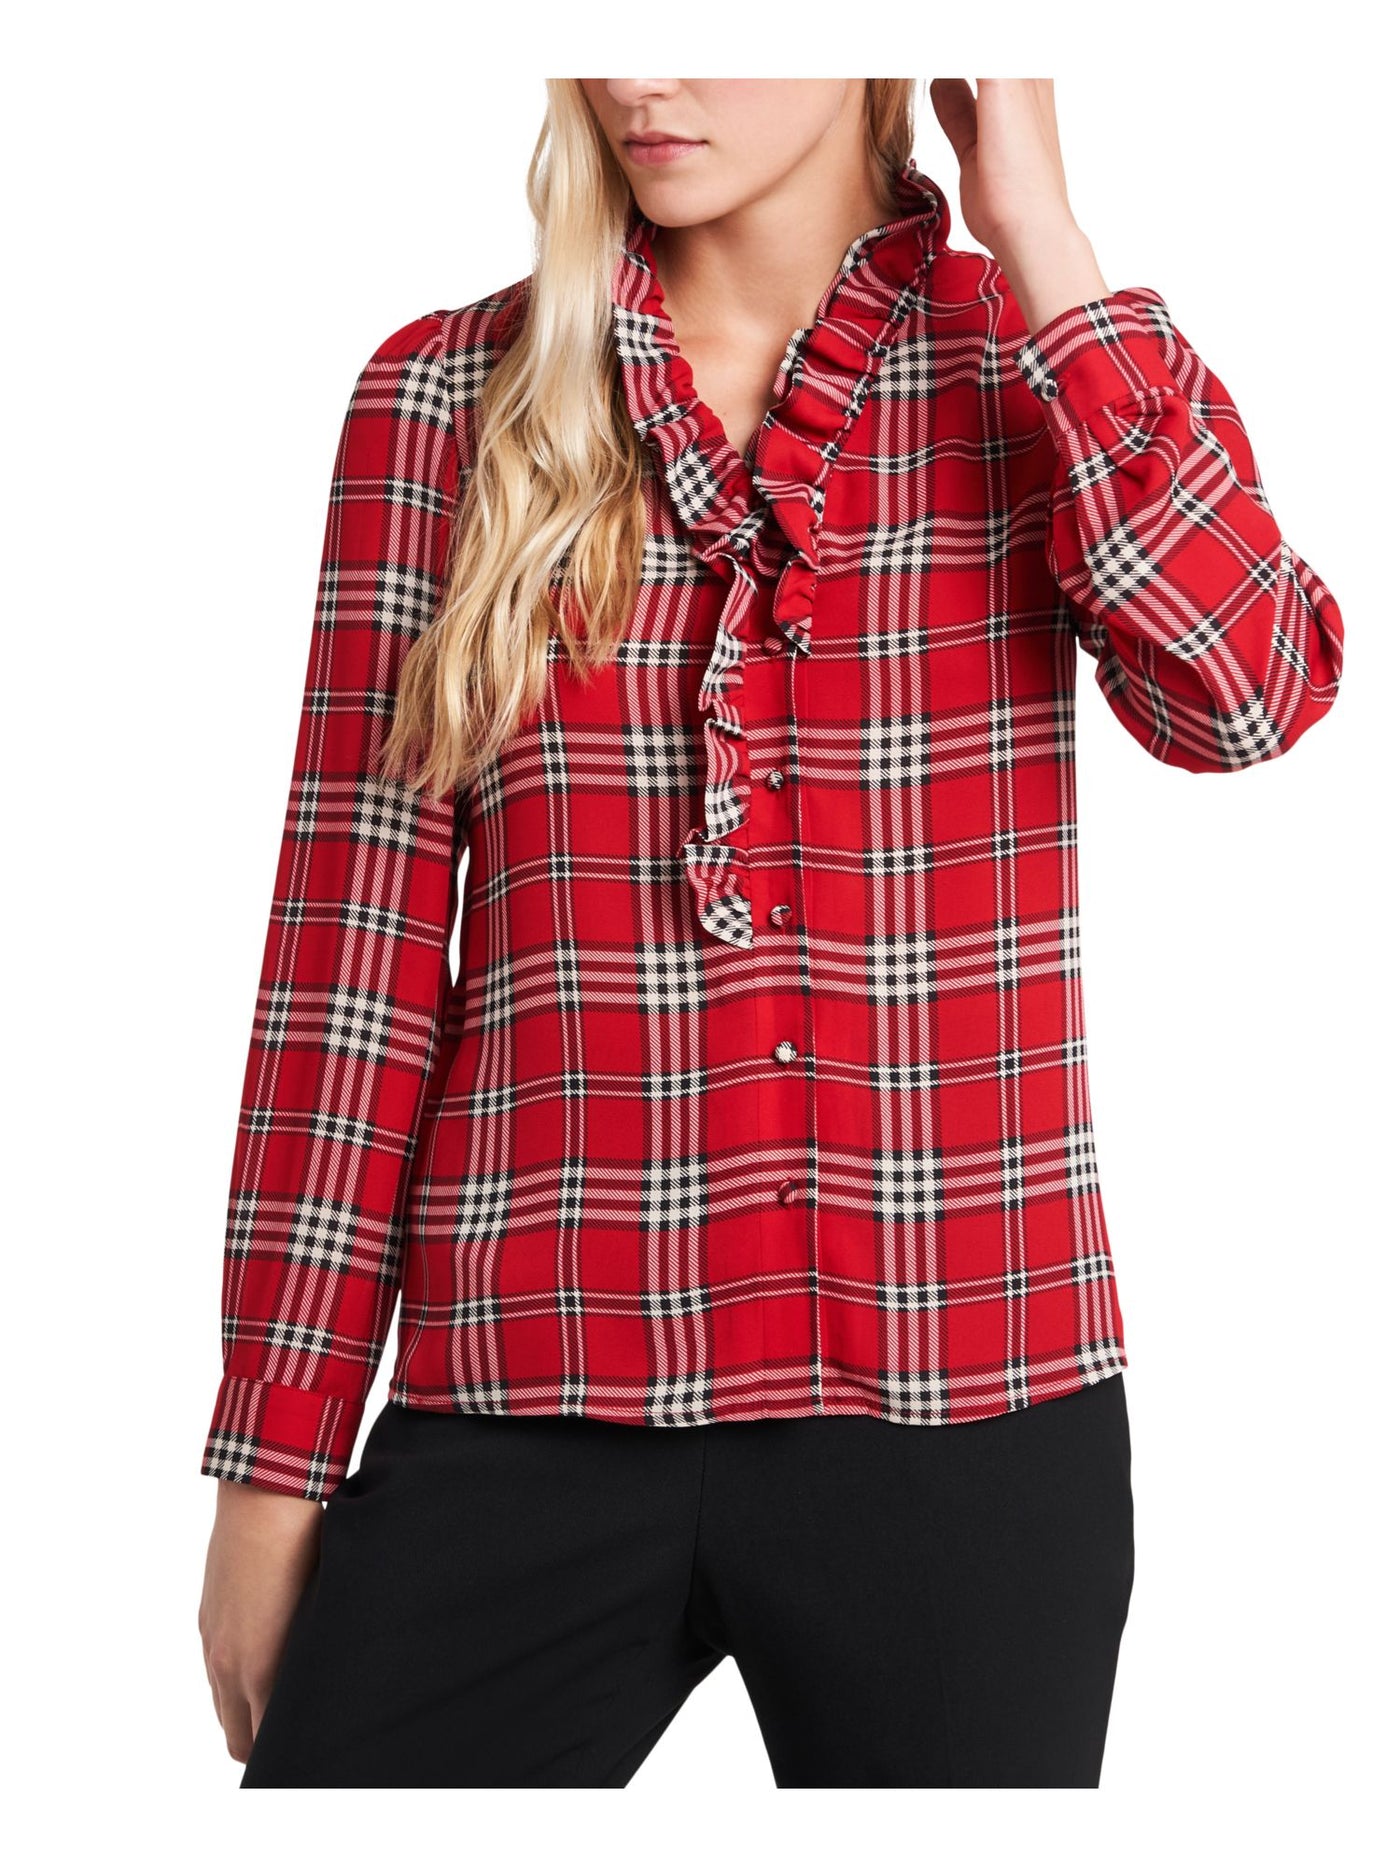 RILEY&RAE Womens Pink Plaid Long Sleeve Button Up Top M